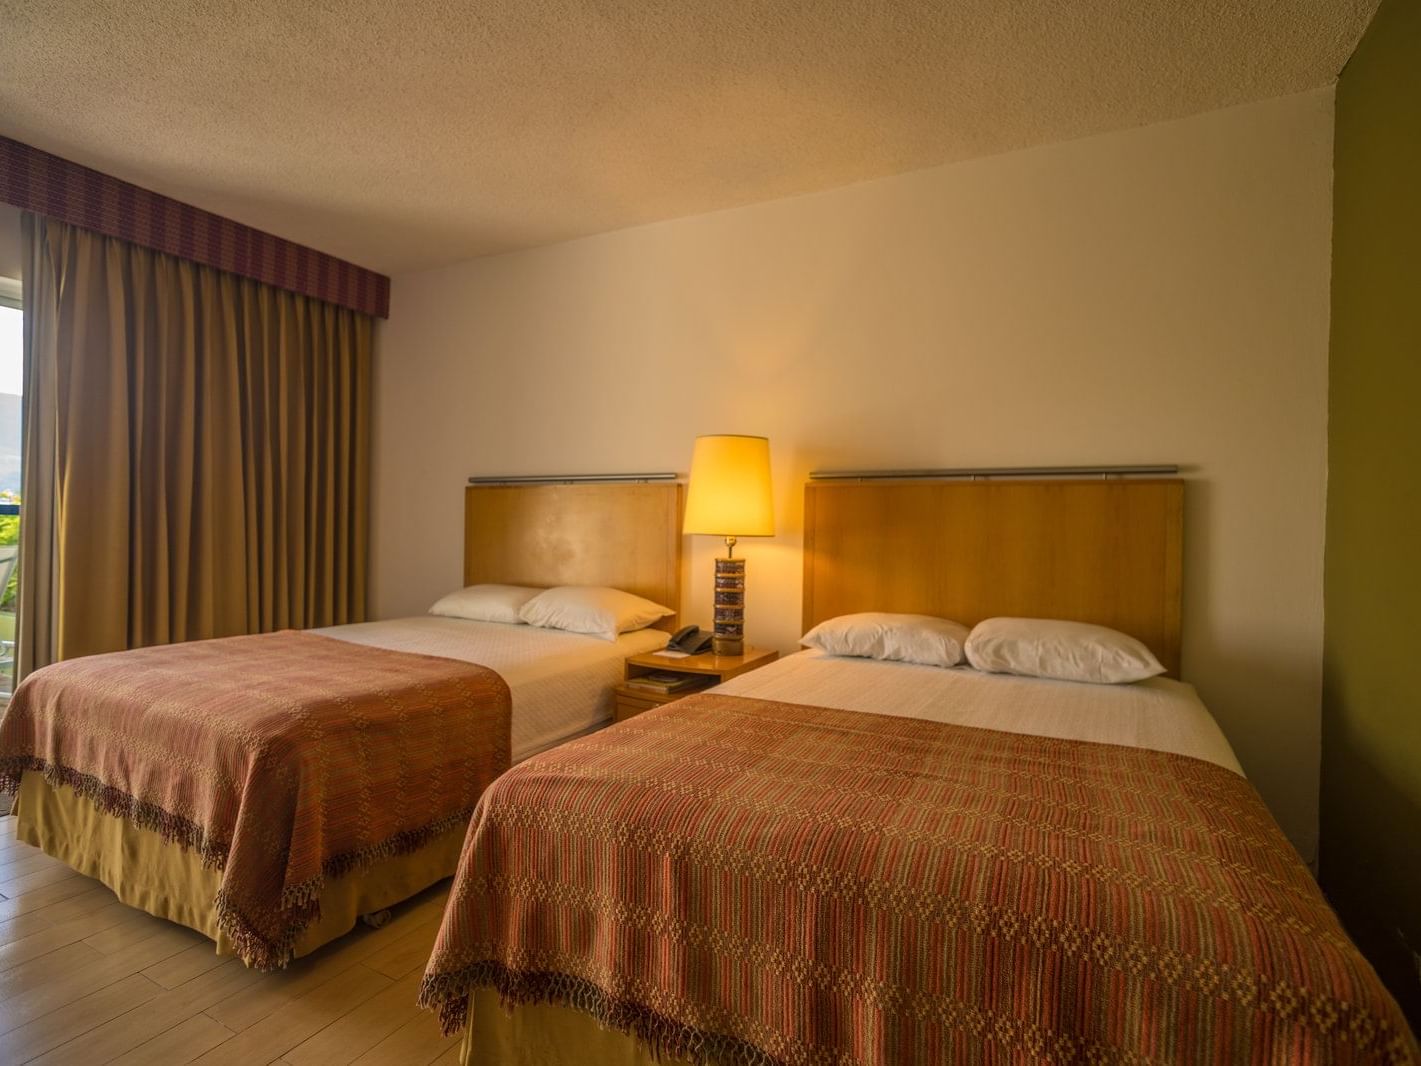 2 Cozy beds and side table in Standard Room with wooden floors at Porta Hotel del Lago